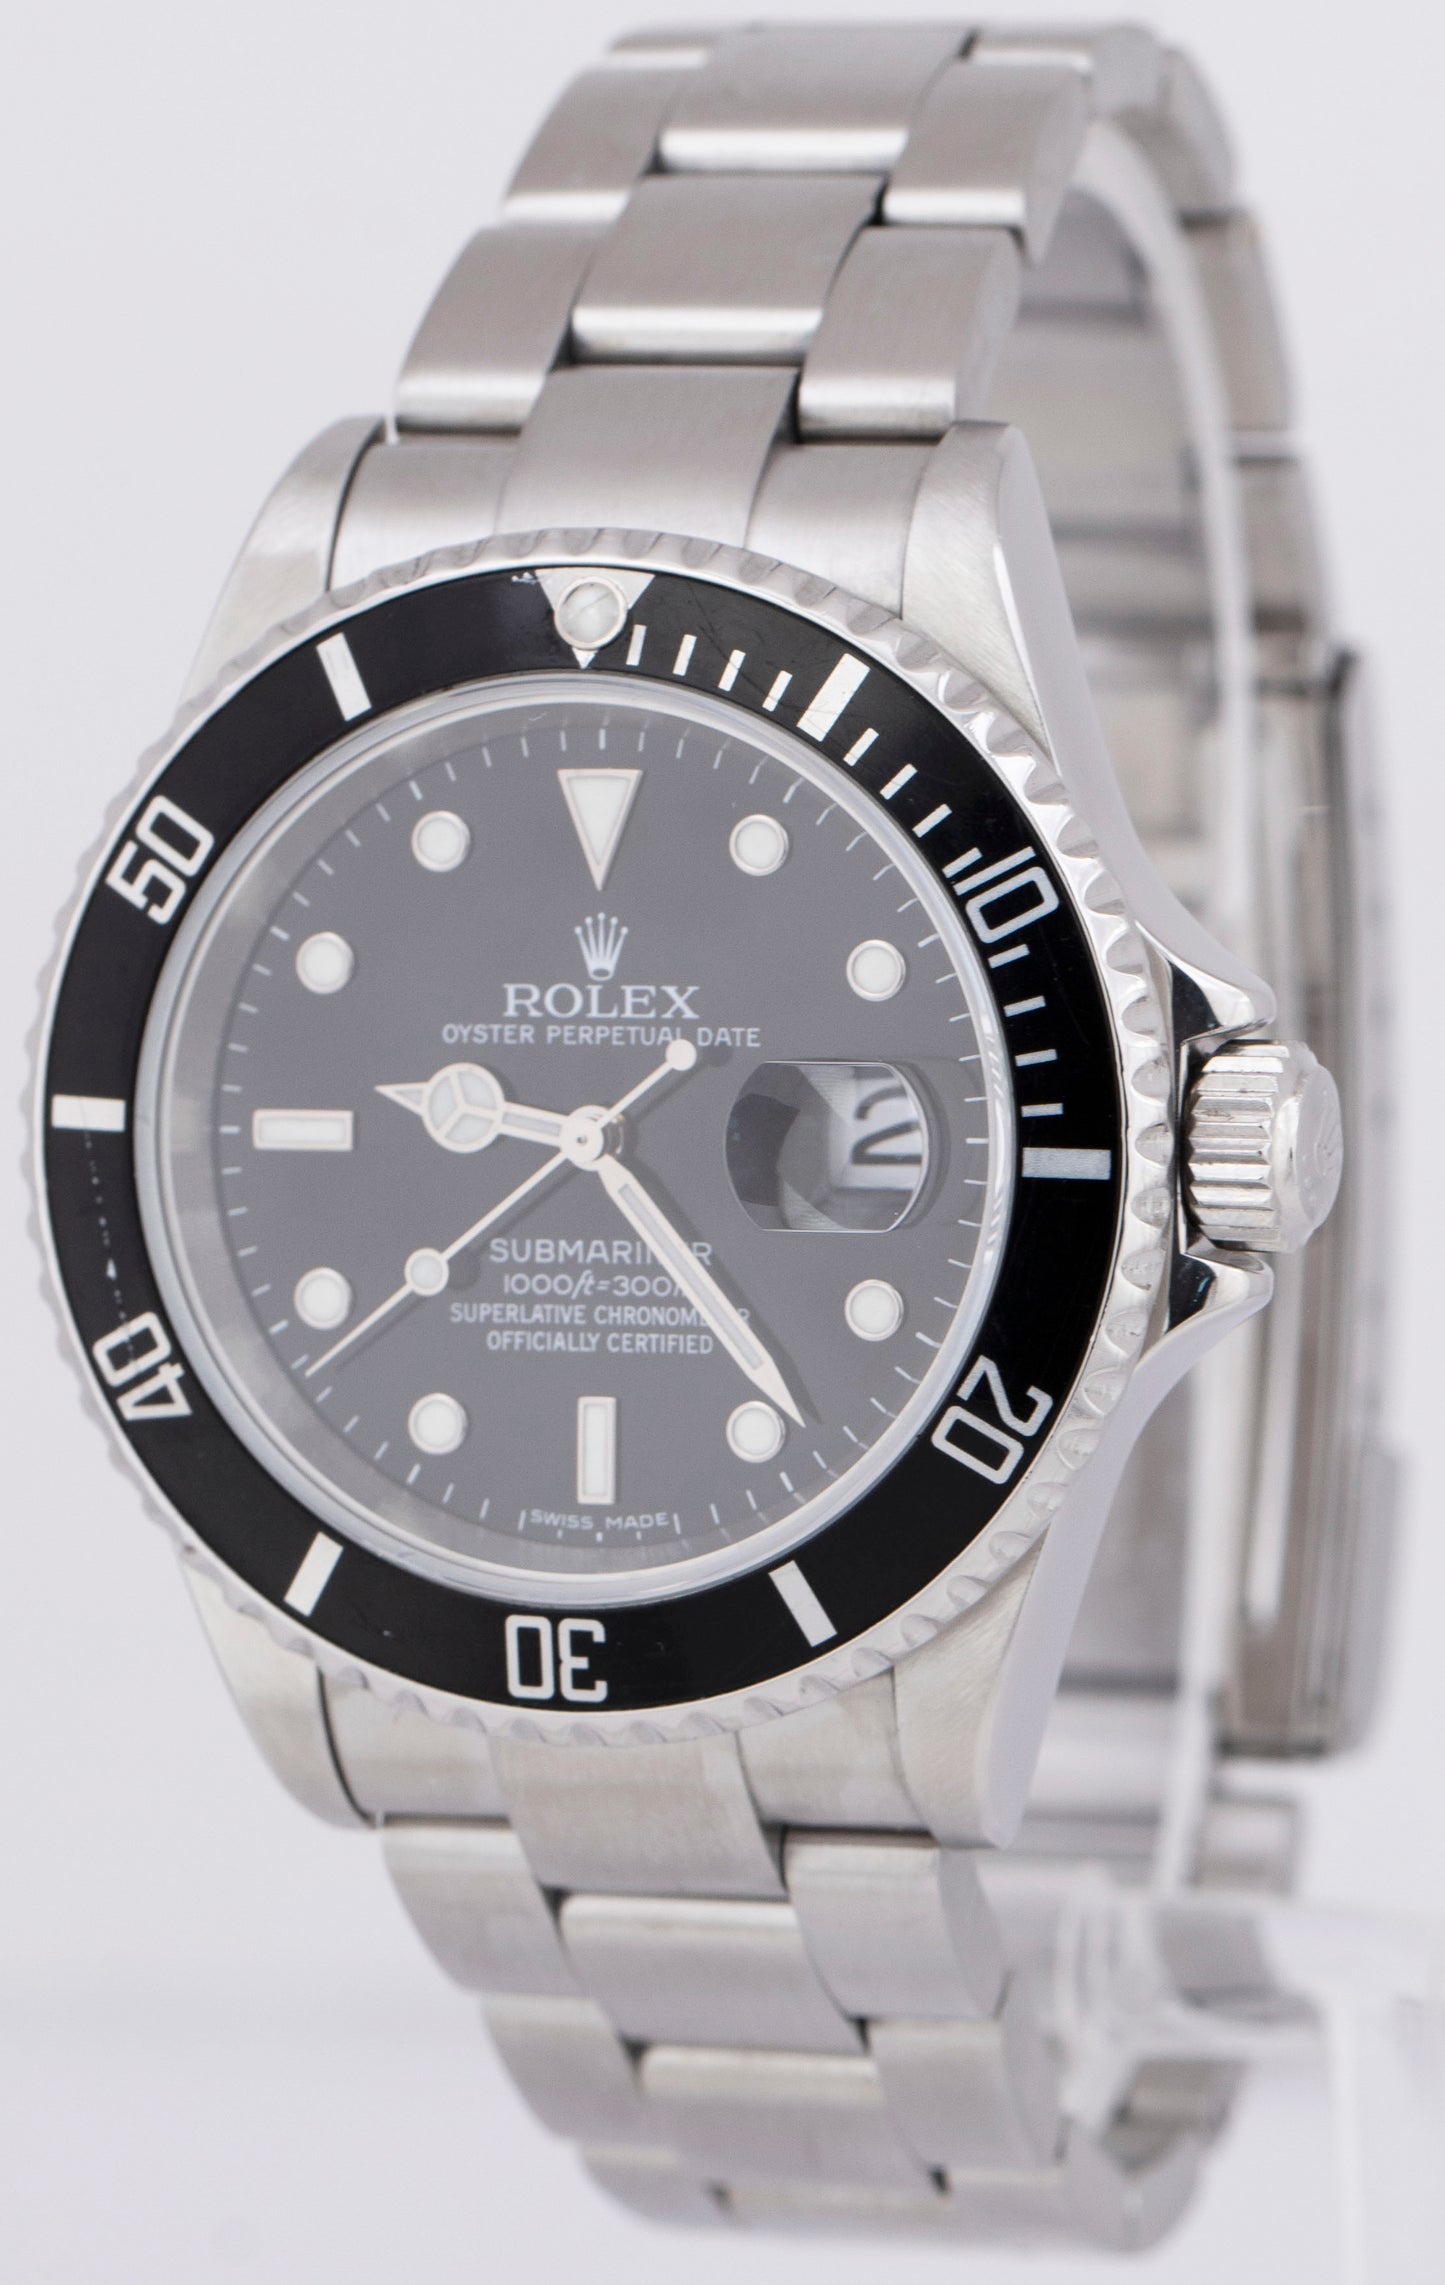 MINT Rolex Submariner Date 40mm Black NO-HOLES Stainless Steel 16610 Watch